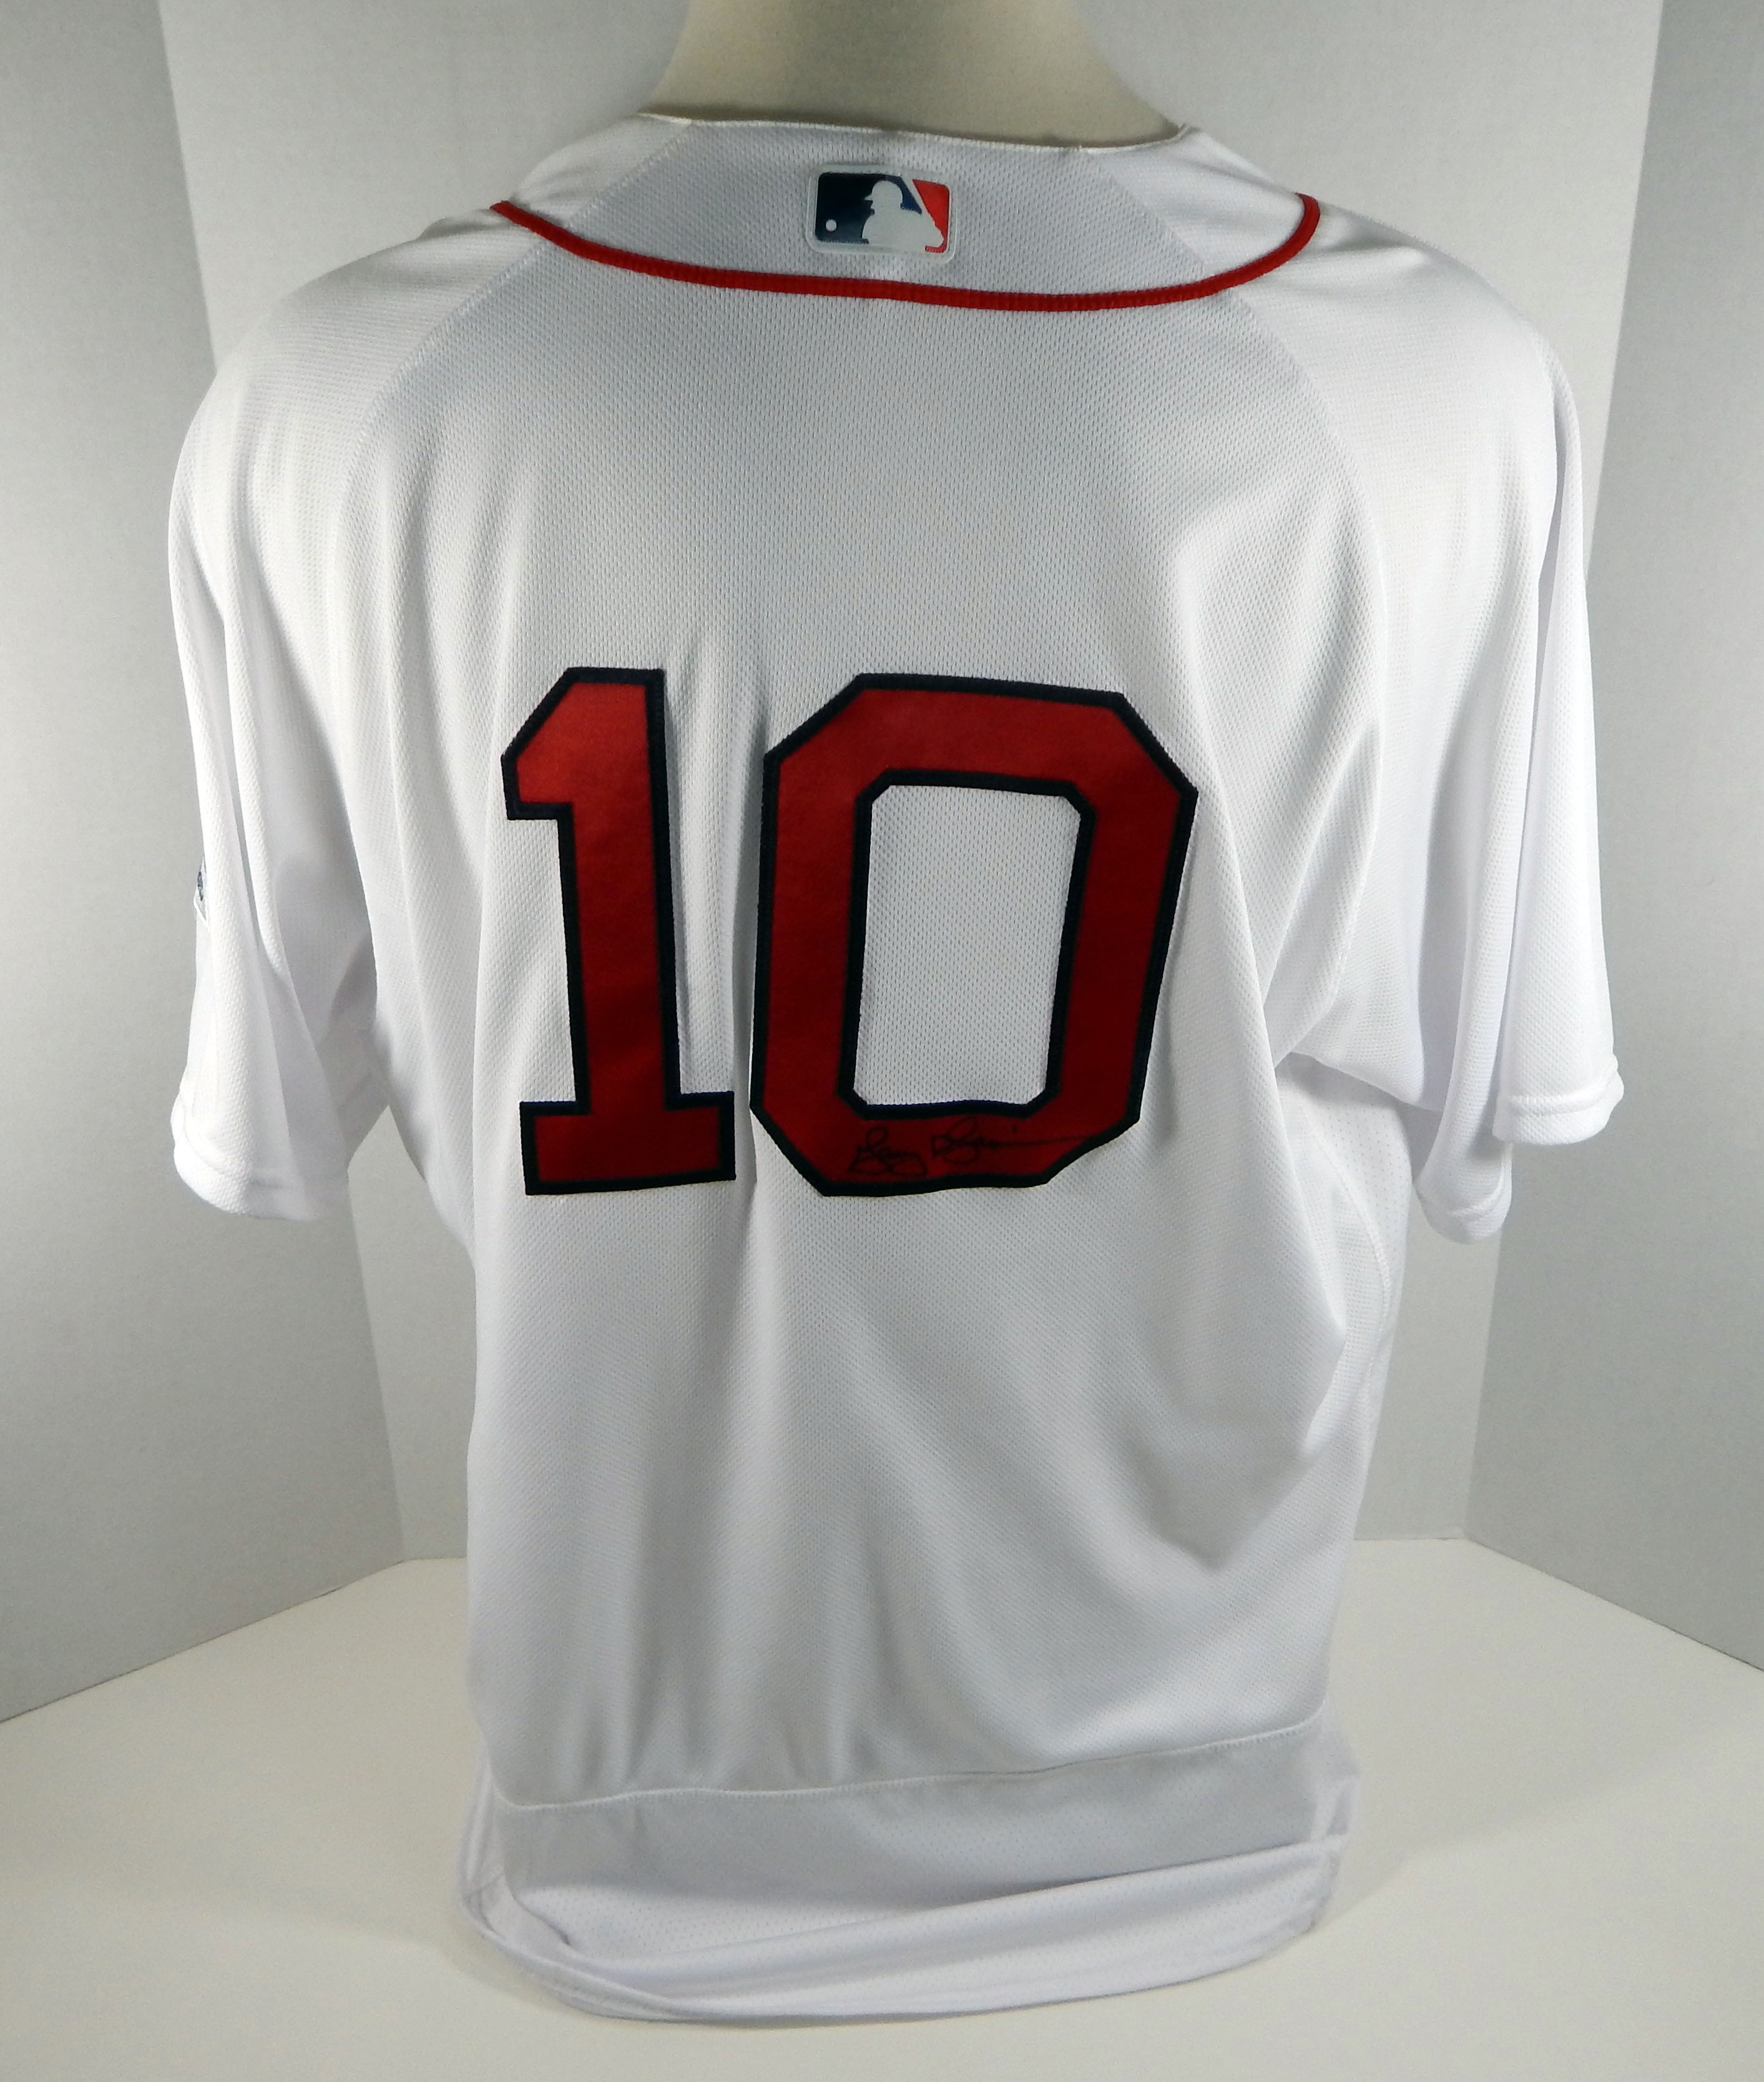 white red sox jersey